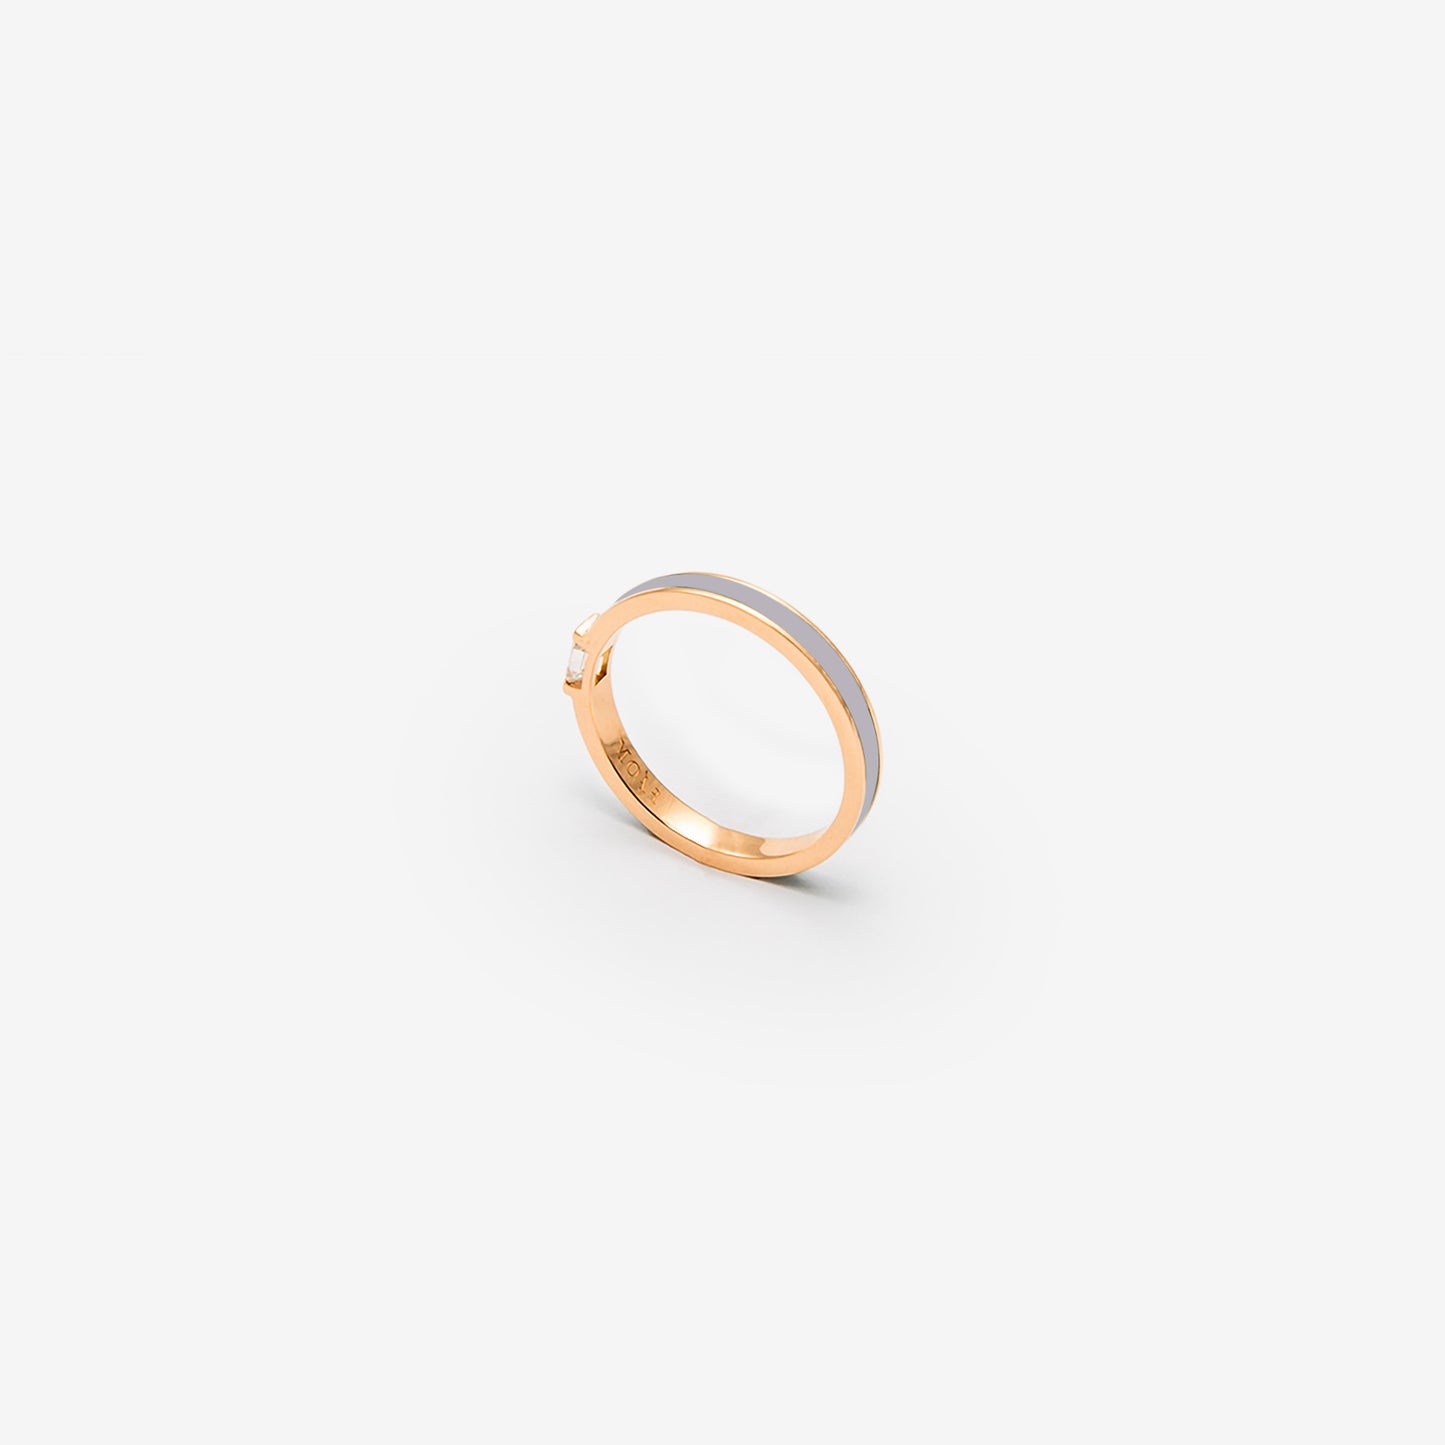 Rose gold band ring with cool gray enamel and diamond